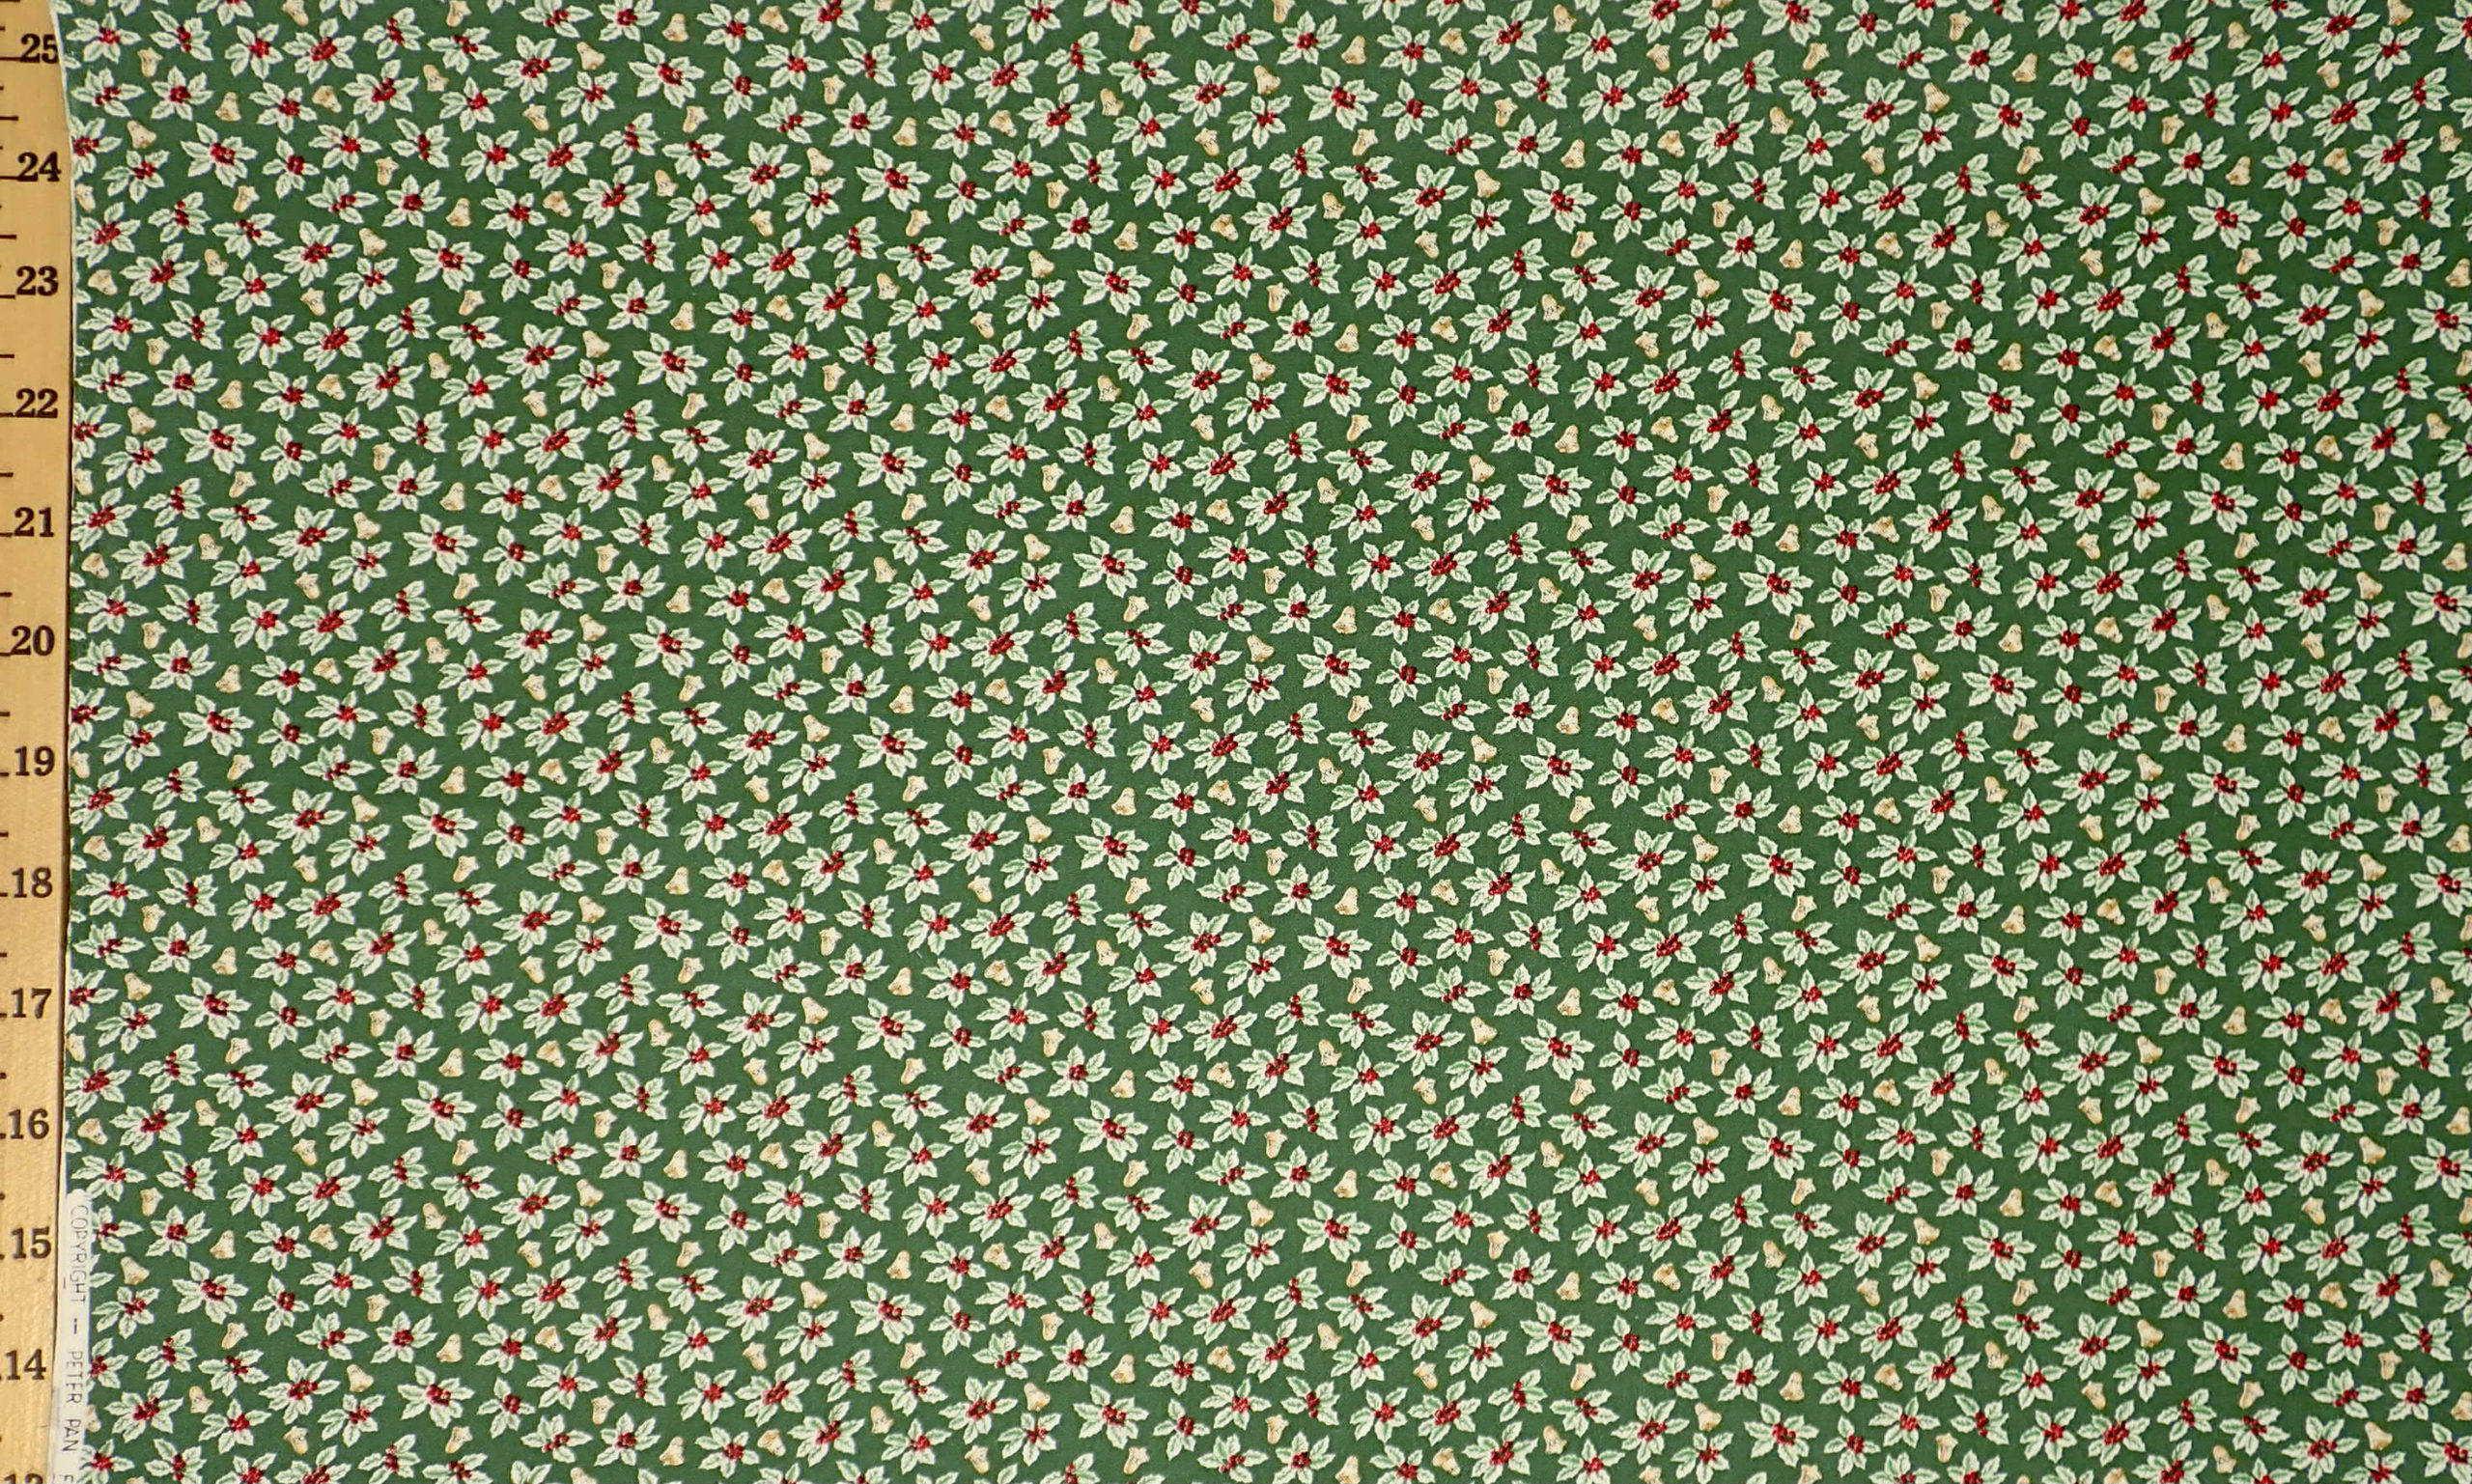 Holly & Bells on Green by Peter Pan Fabrics Inc. | AntiqueFabric.com